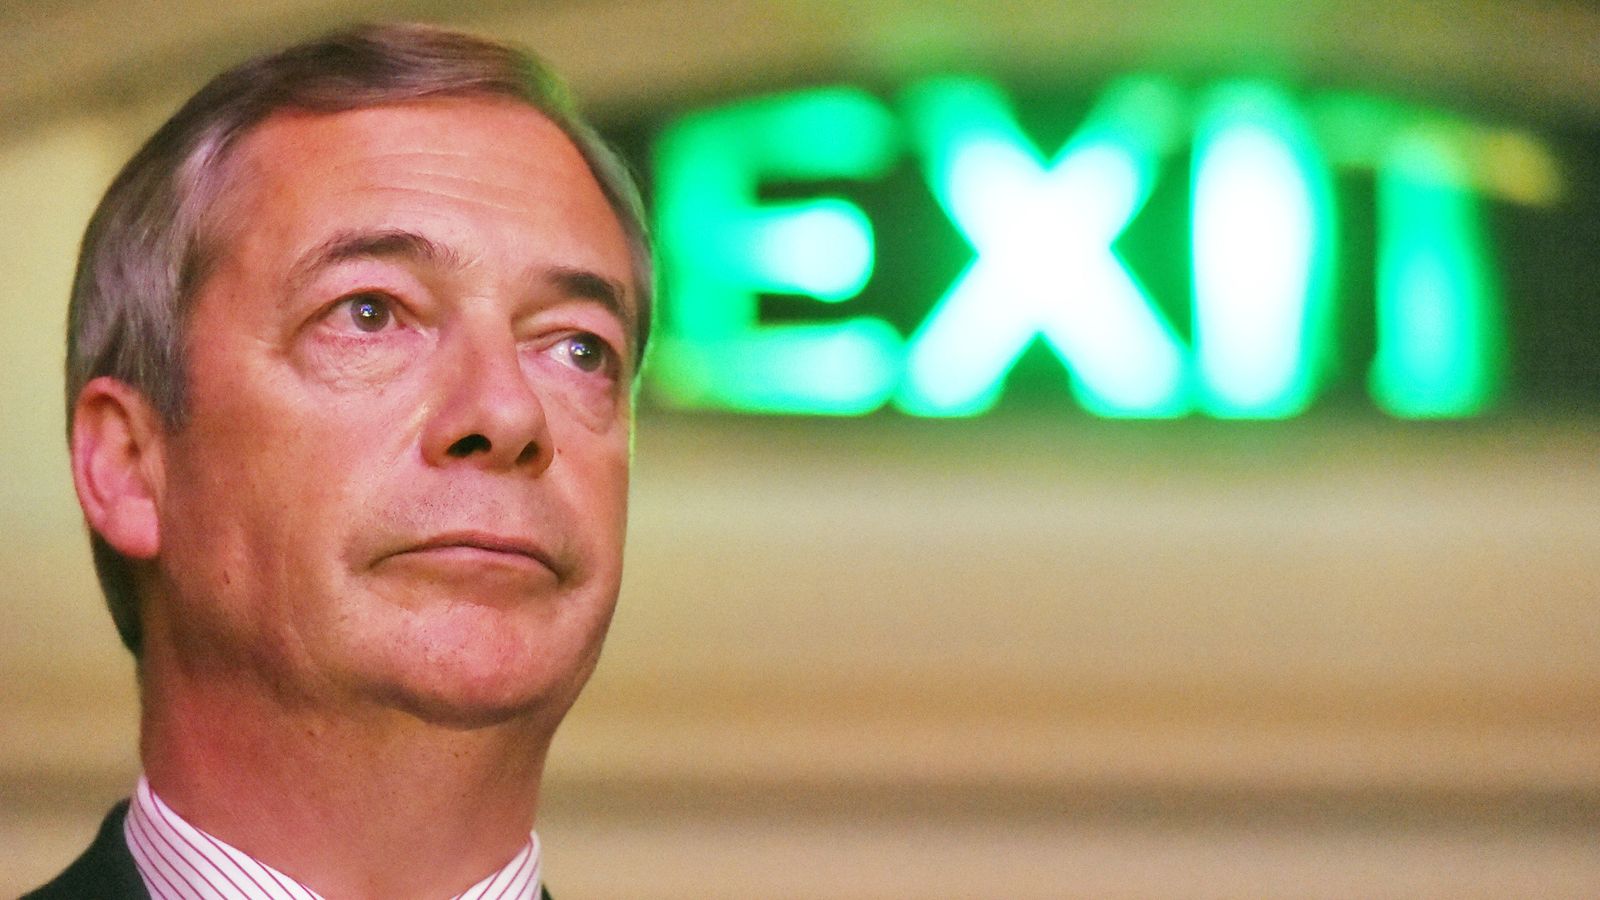 Nigel Farage says Brexit has 'failed' and economy 'has not benefited' but Downing Street disagrees